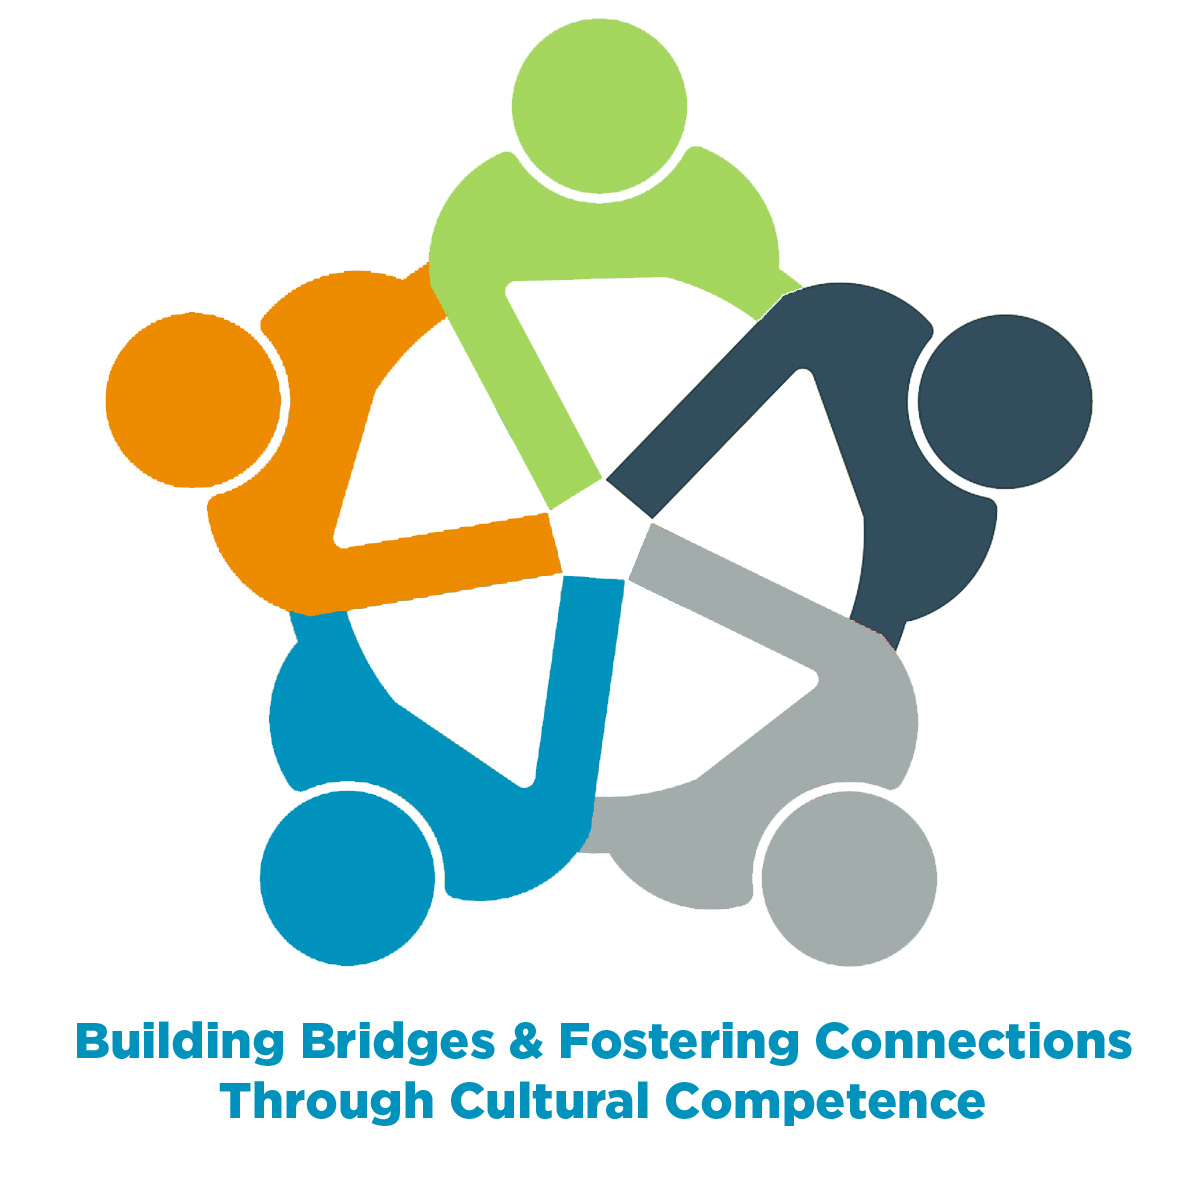 Building Bridges and Fostering Connections Through Cultural Competence